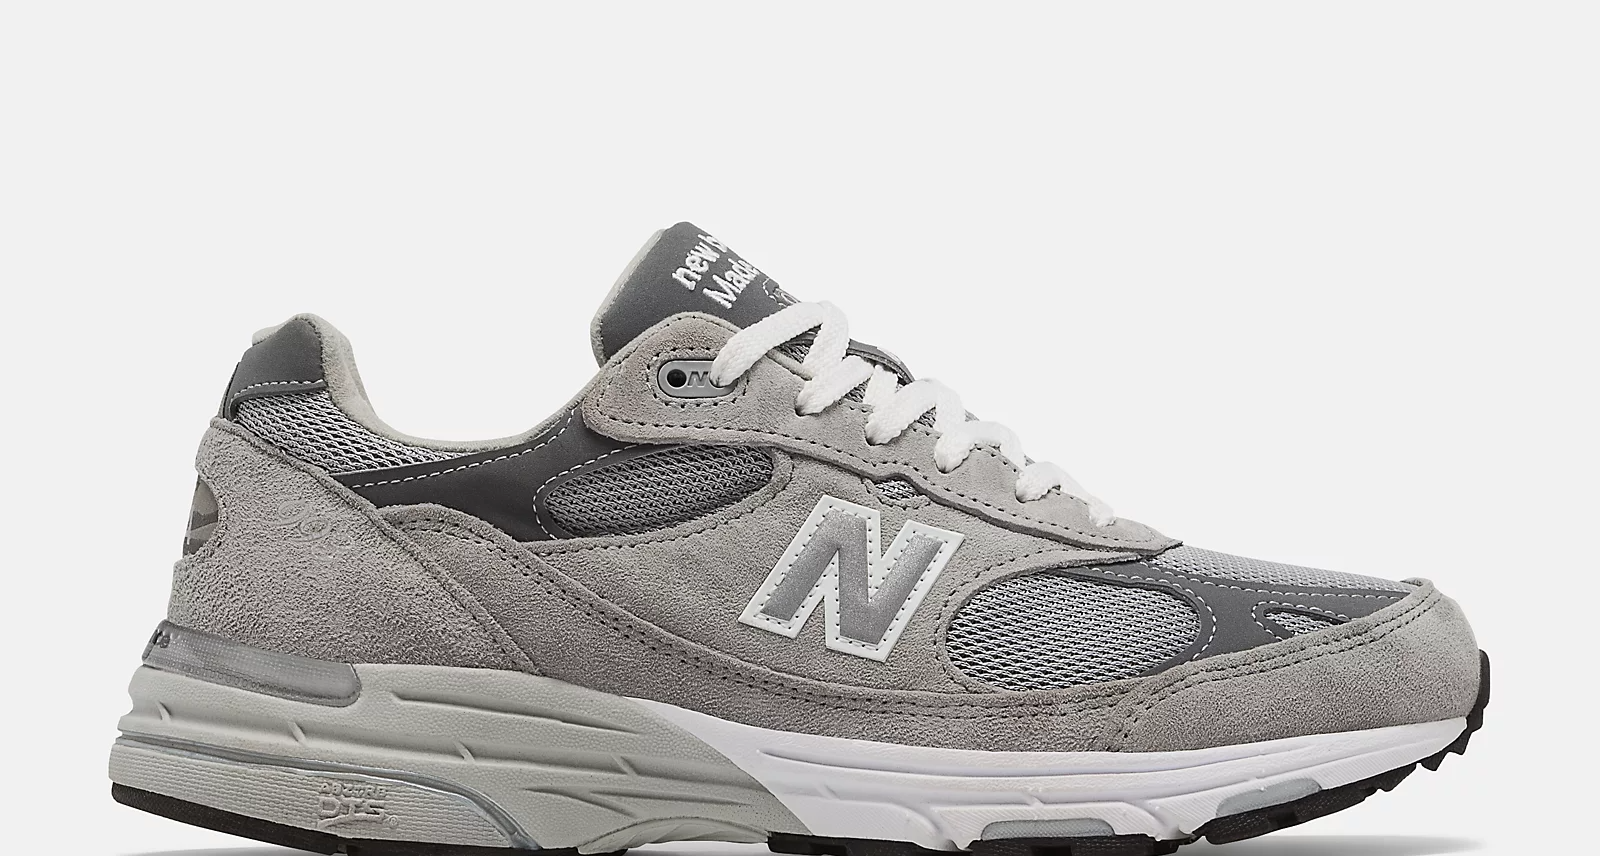 These Supermodel-Loved New Balance Sneakers Are Worth the Hype